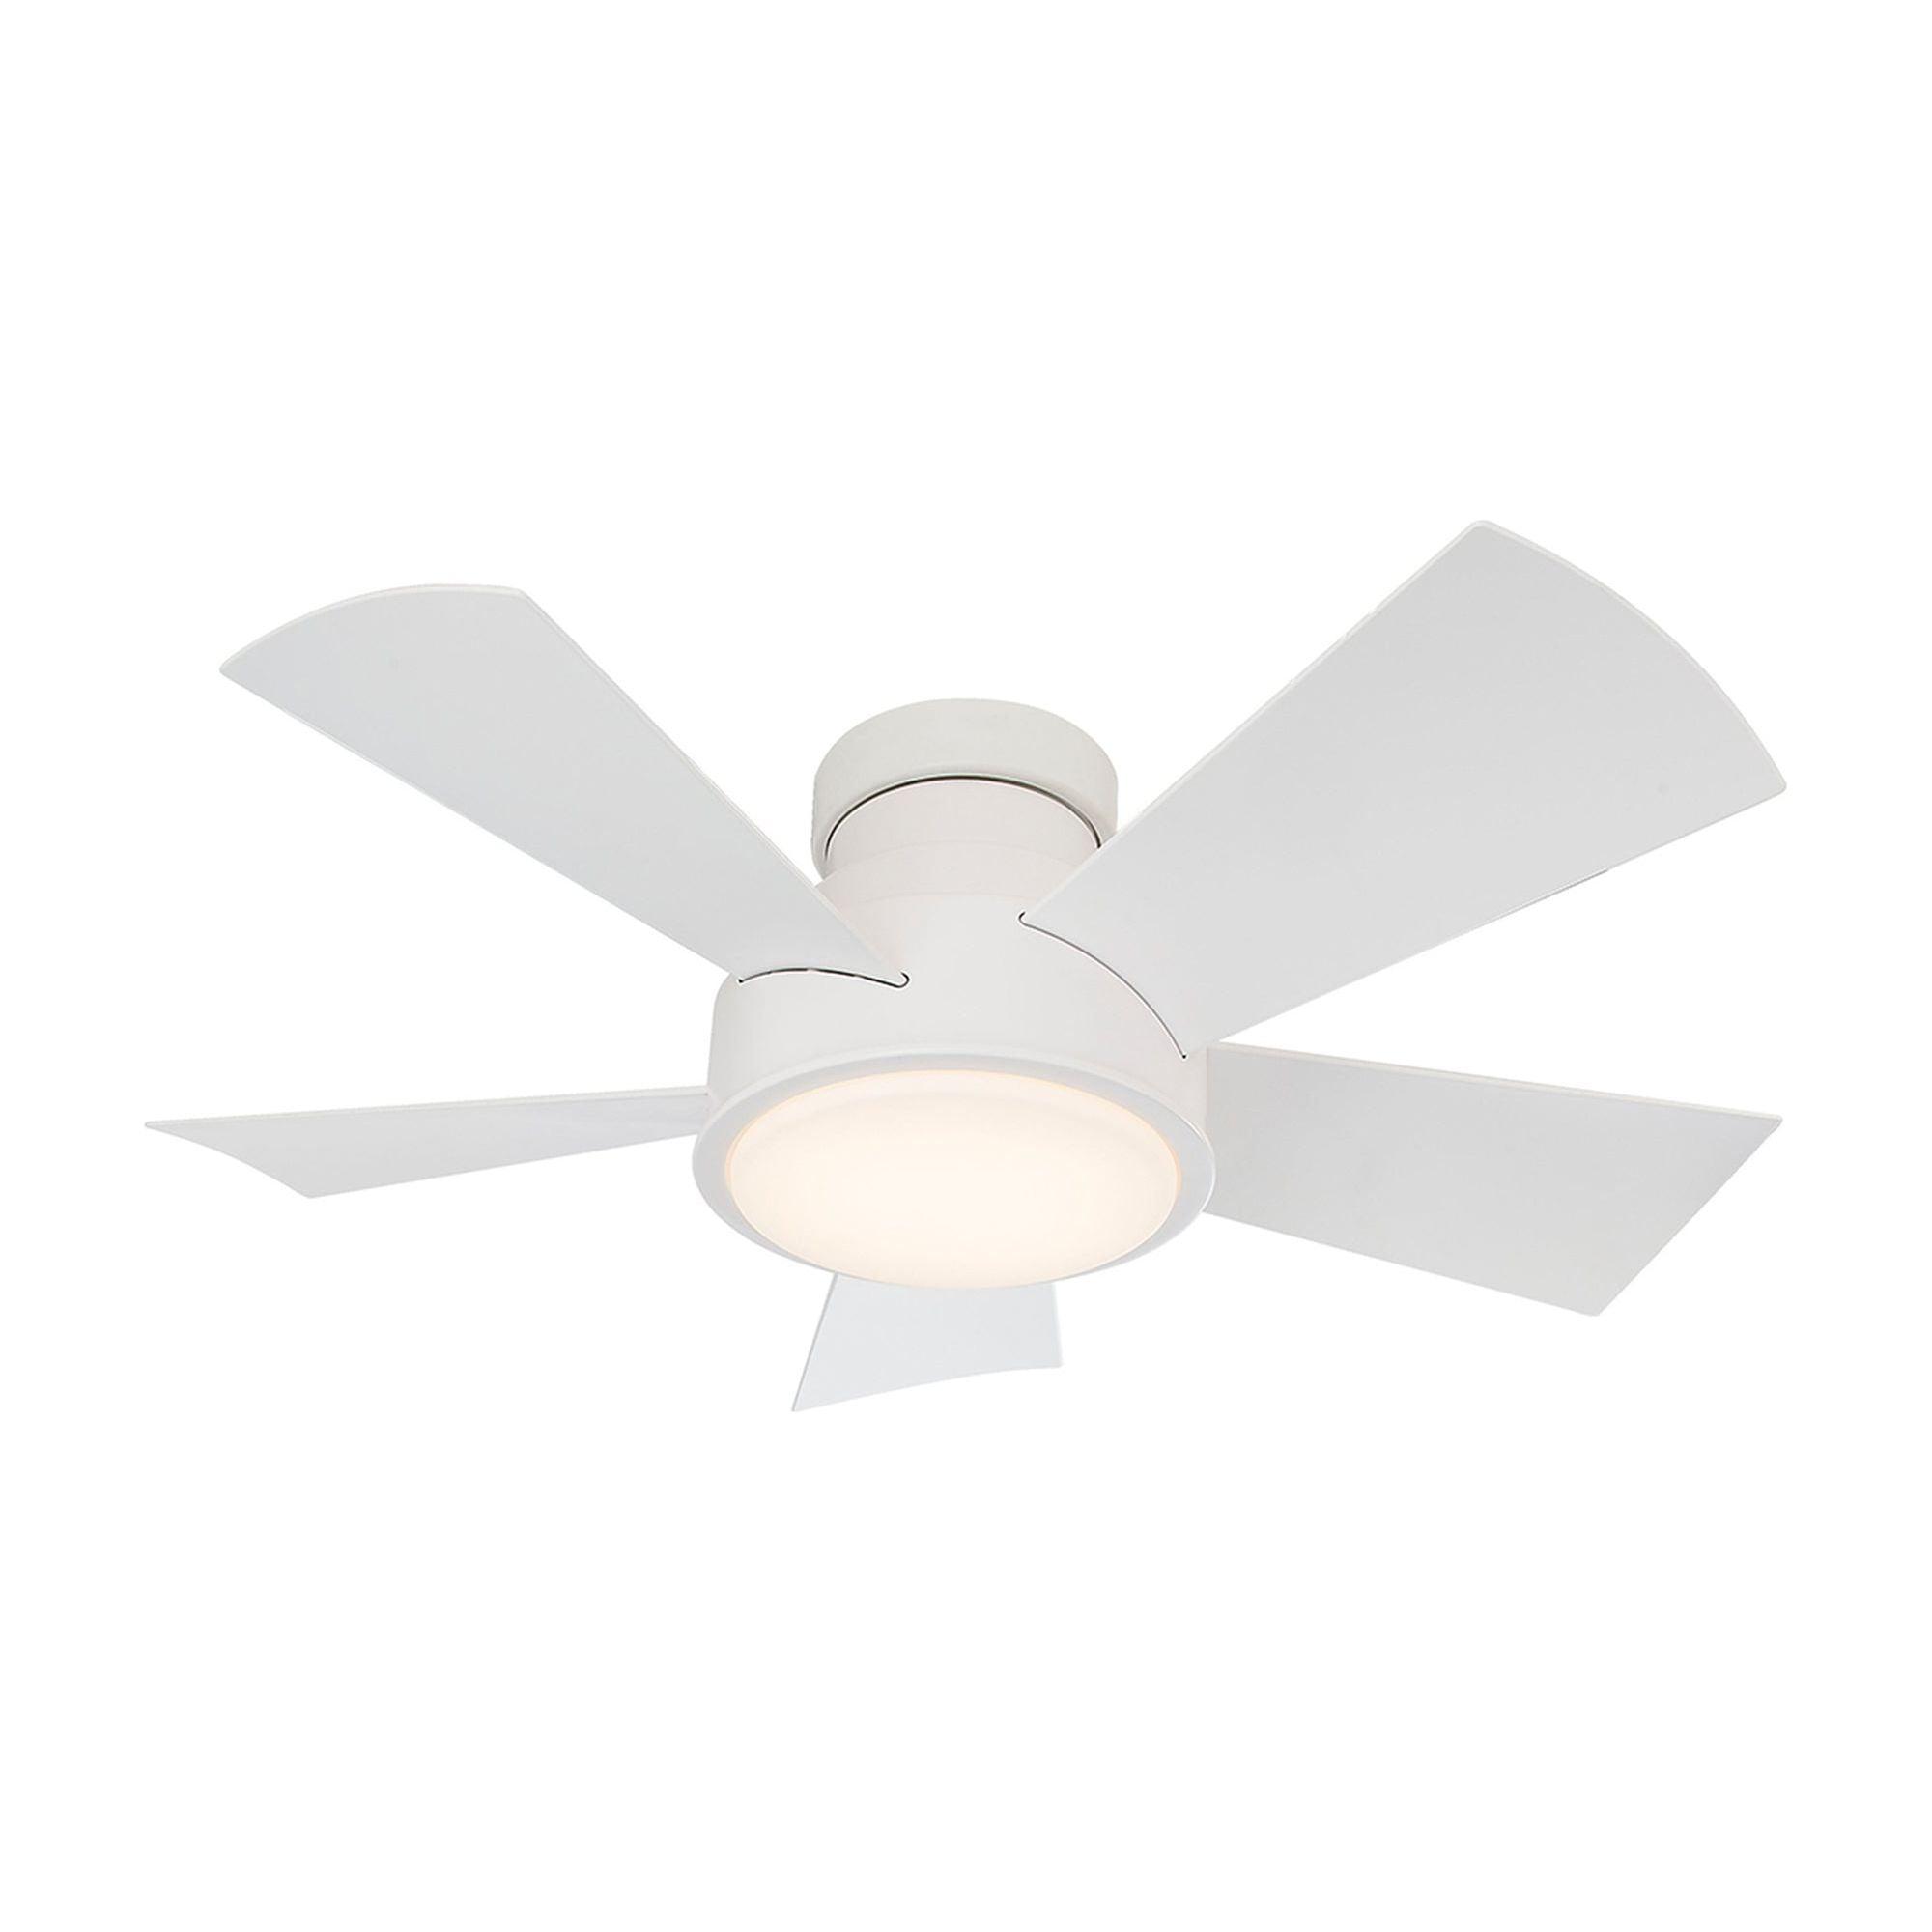 Modern Forms - Vox Indoor/Outdoor 5-Blade 38" Smart Flush Mount Ceiling Fan with LED Light Kit and Remote Control - Lights Canada